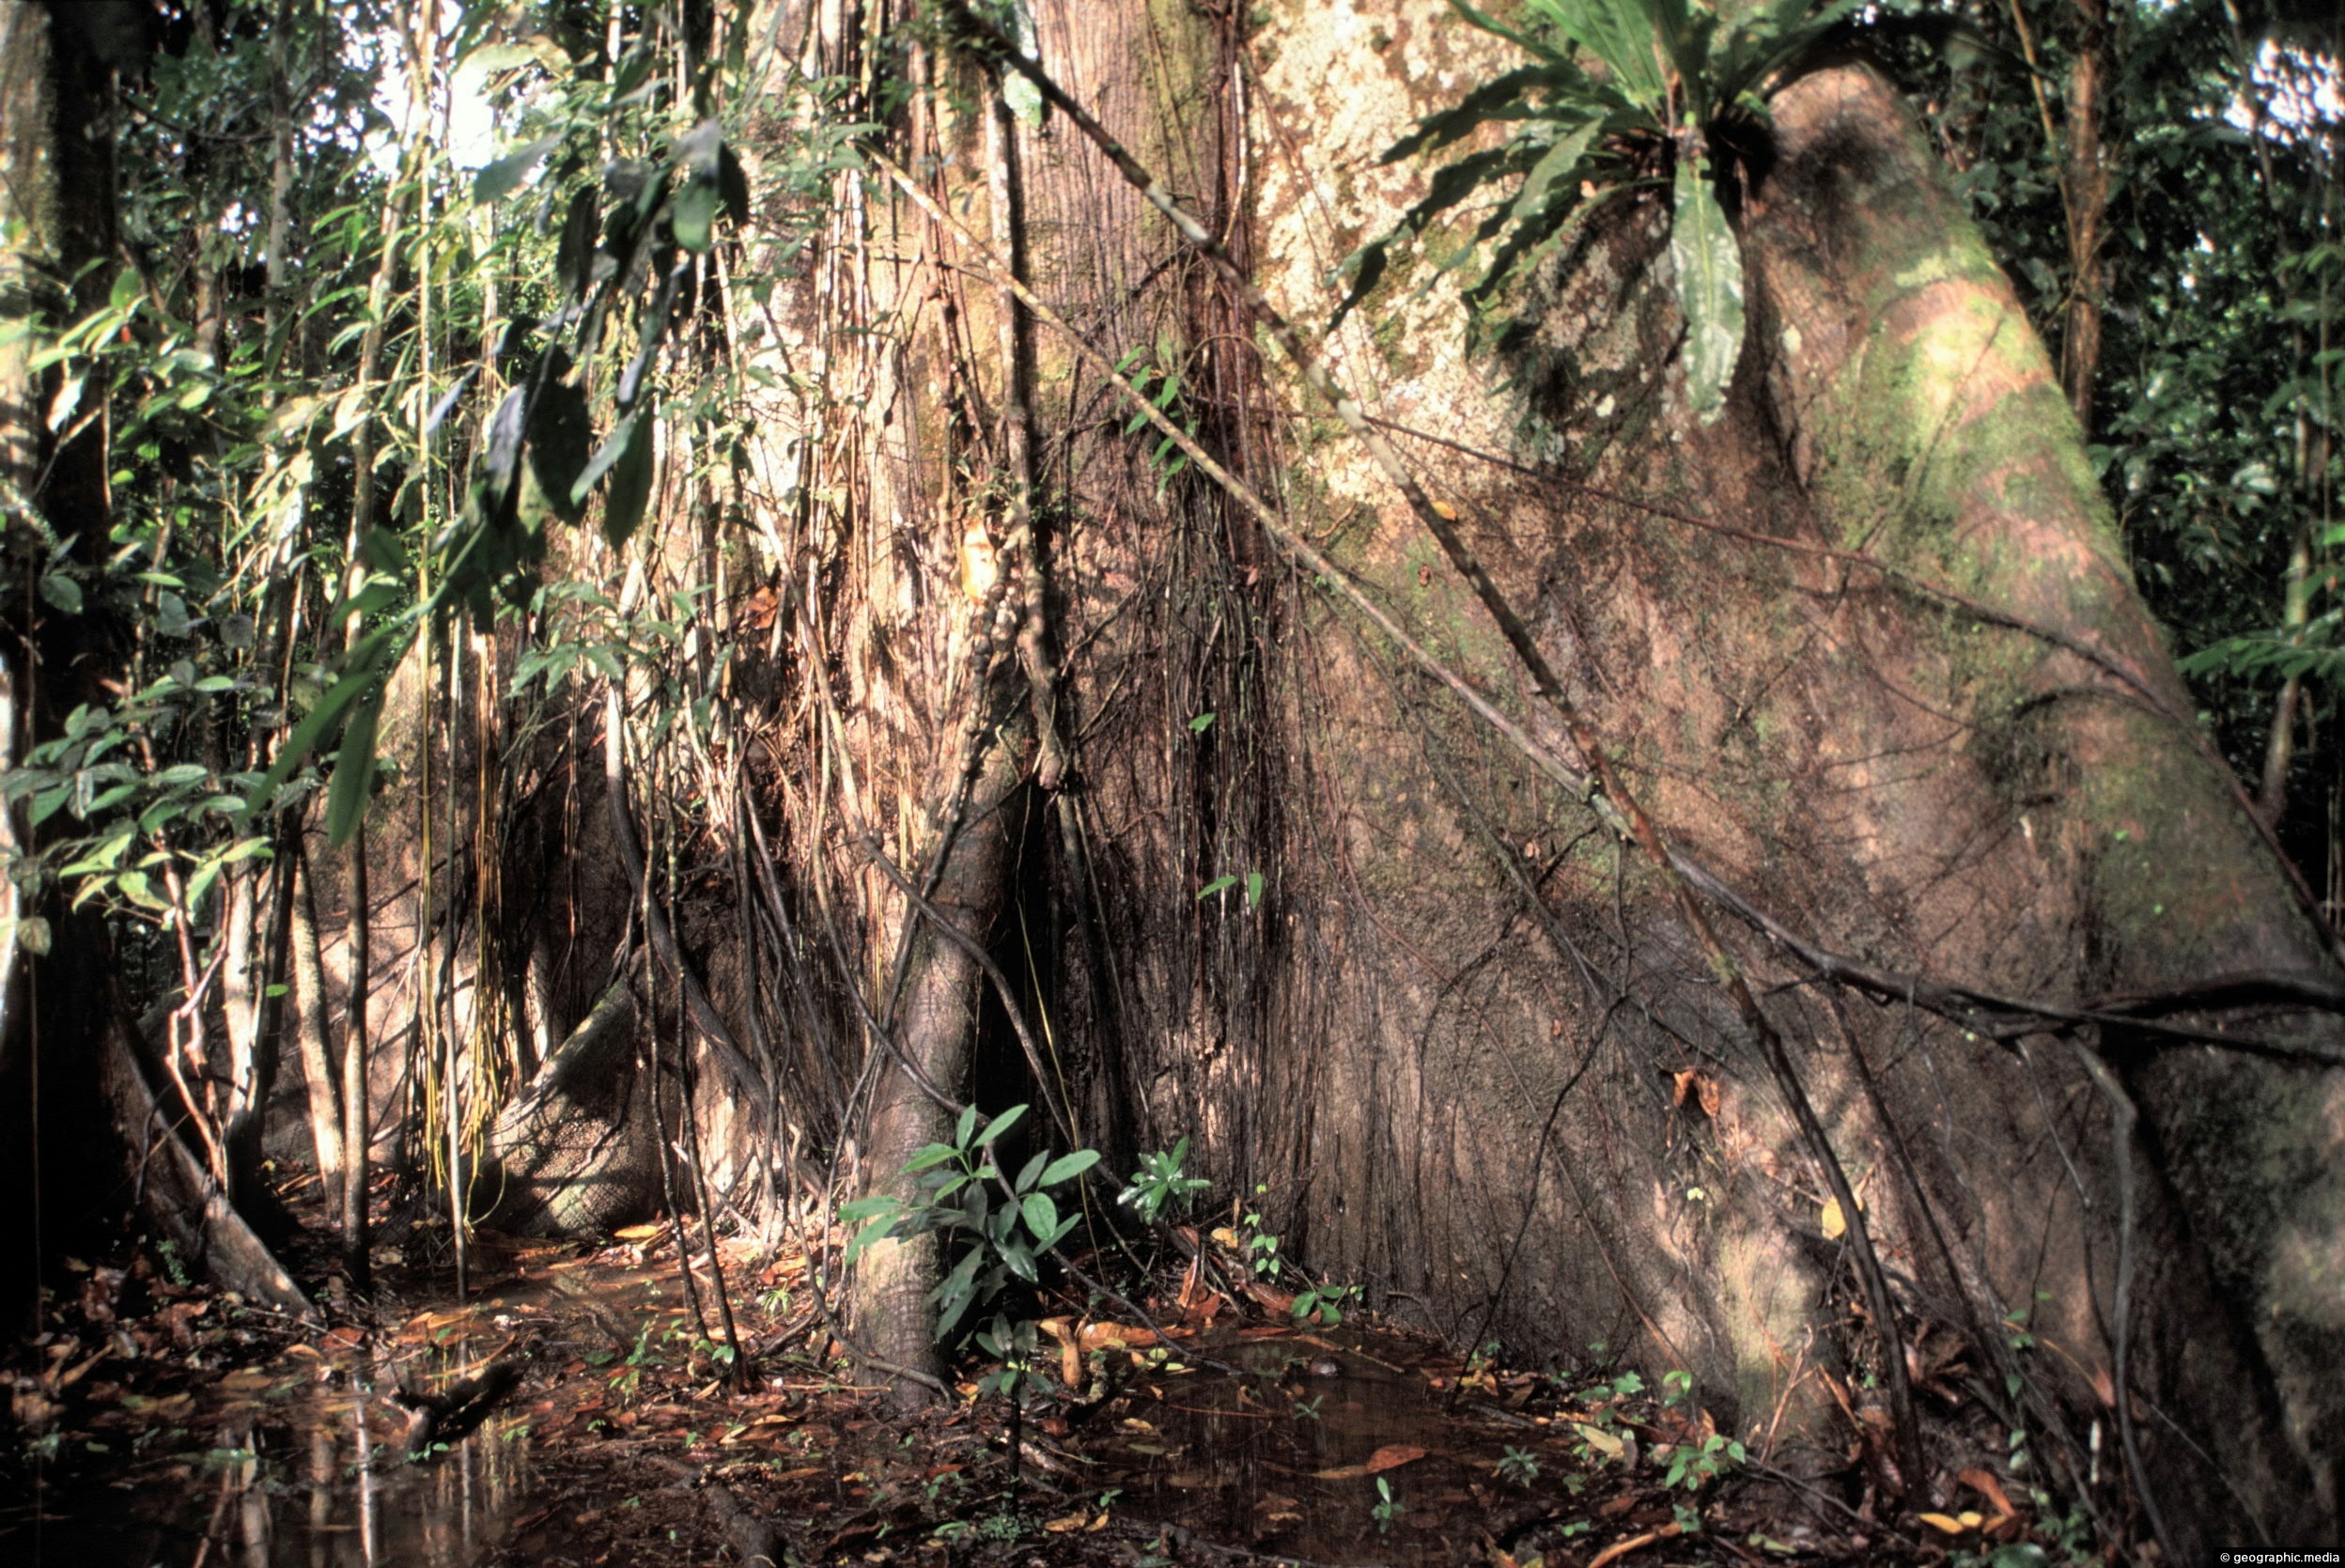 Buttress Roots in the Amazon